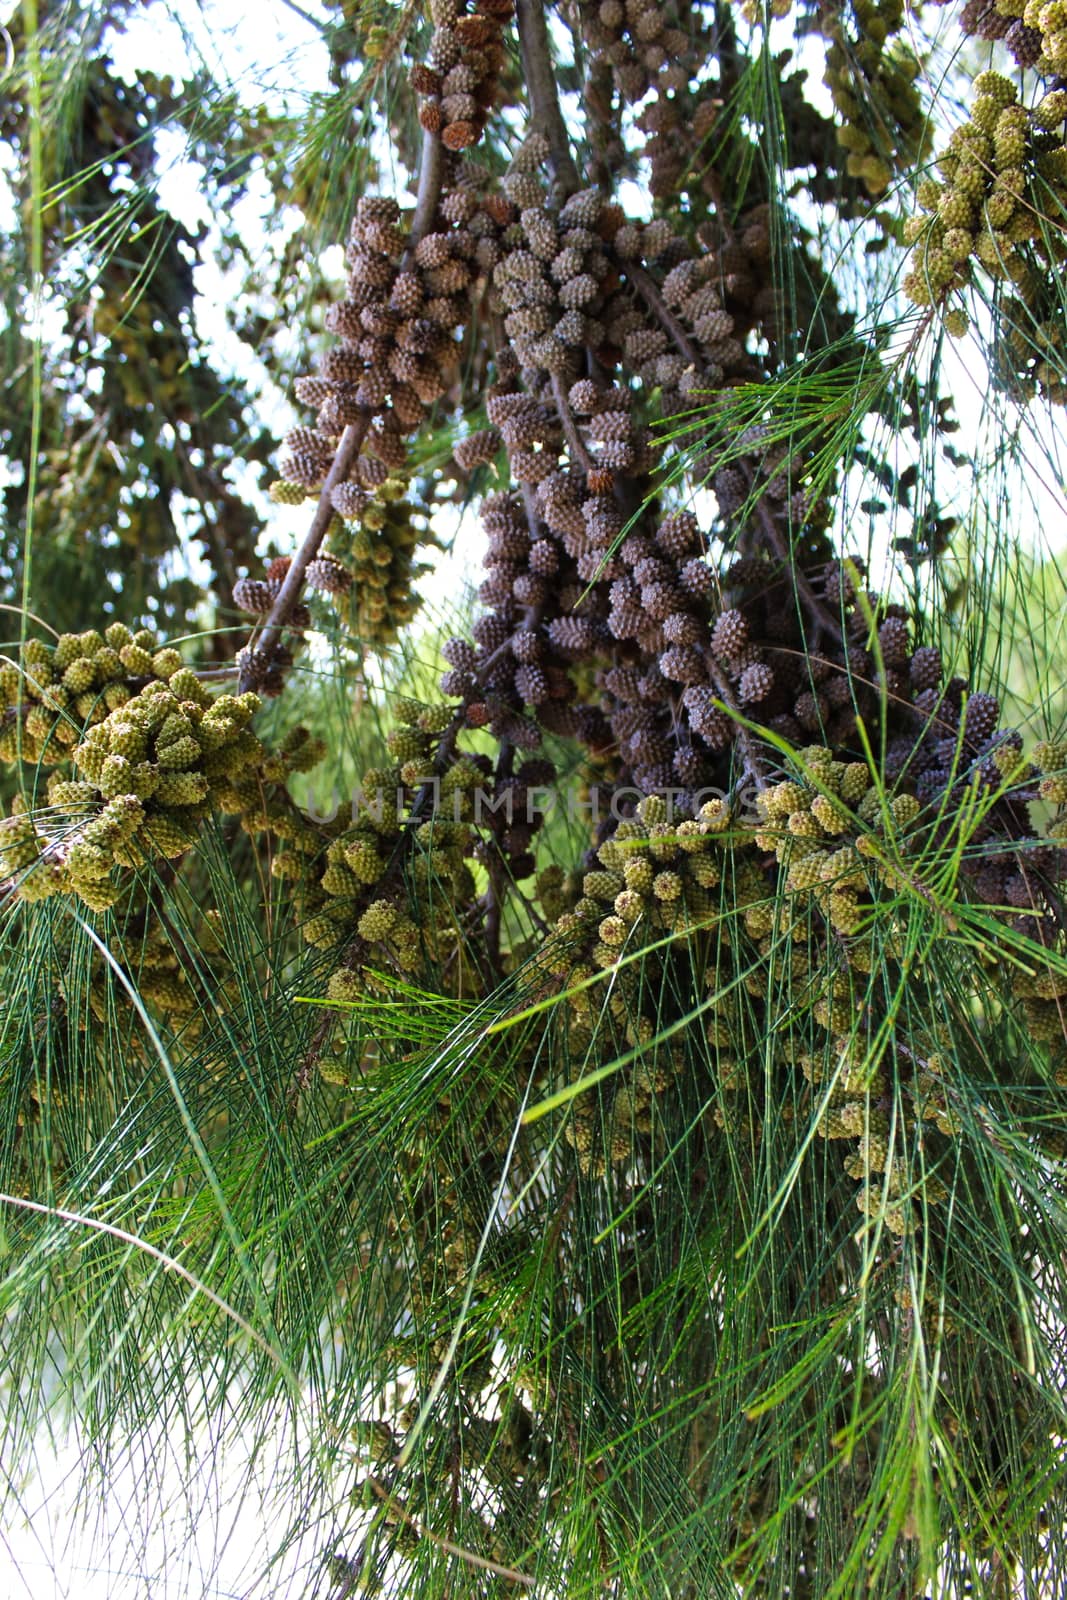 Green and aged fruits of Casuarina Pine, Wind Tree Fruits. Beja, Portugal.